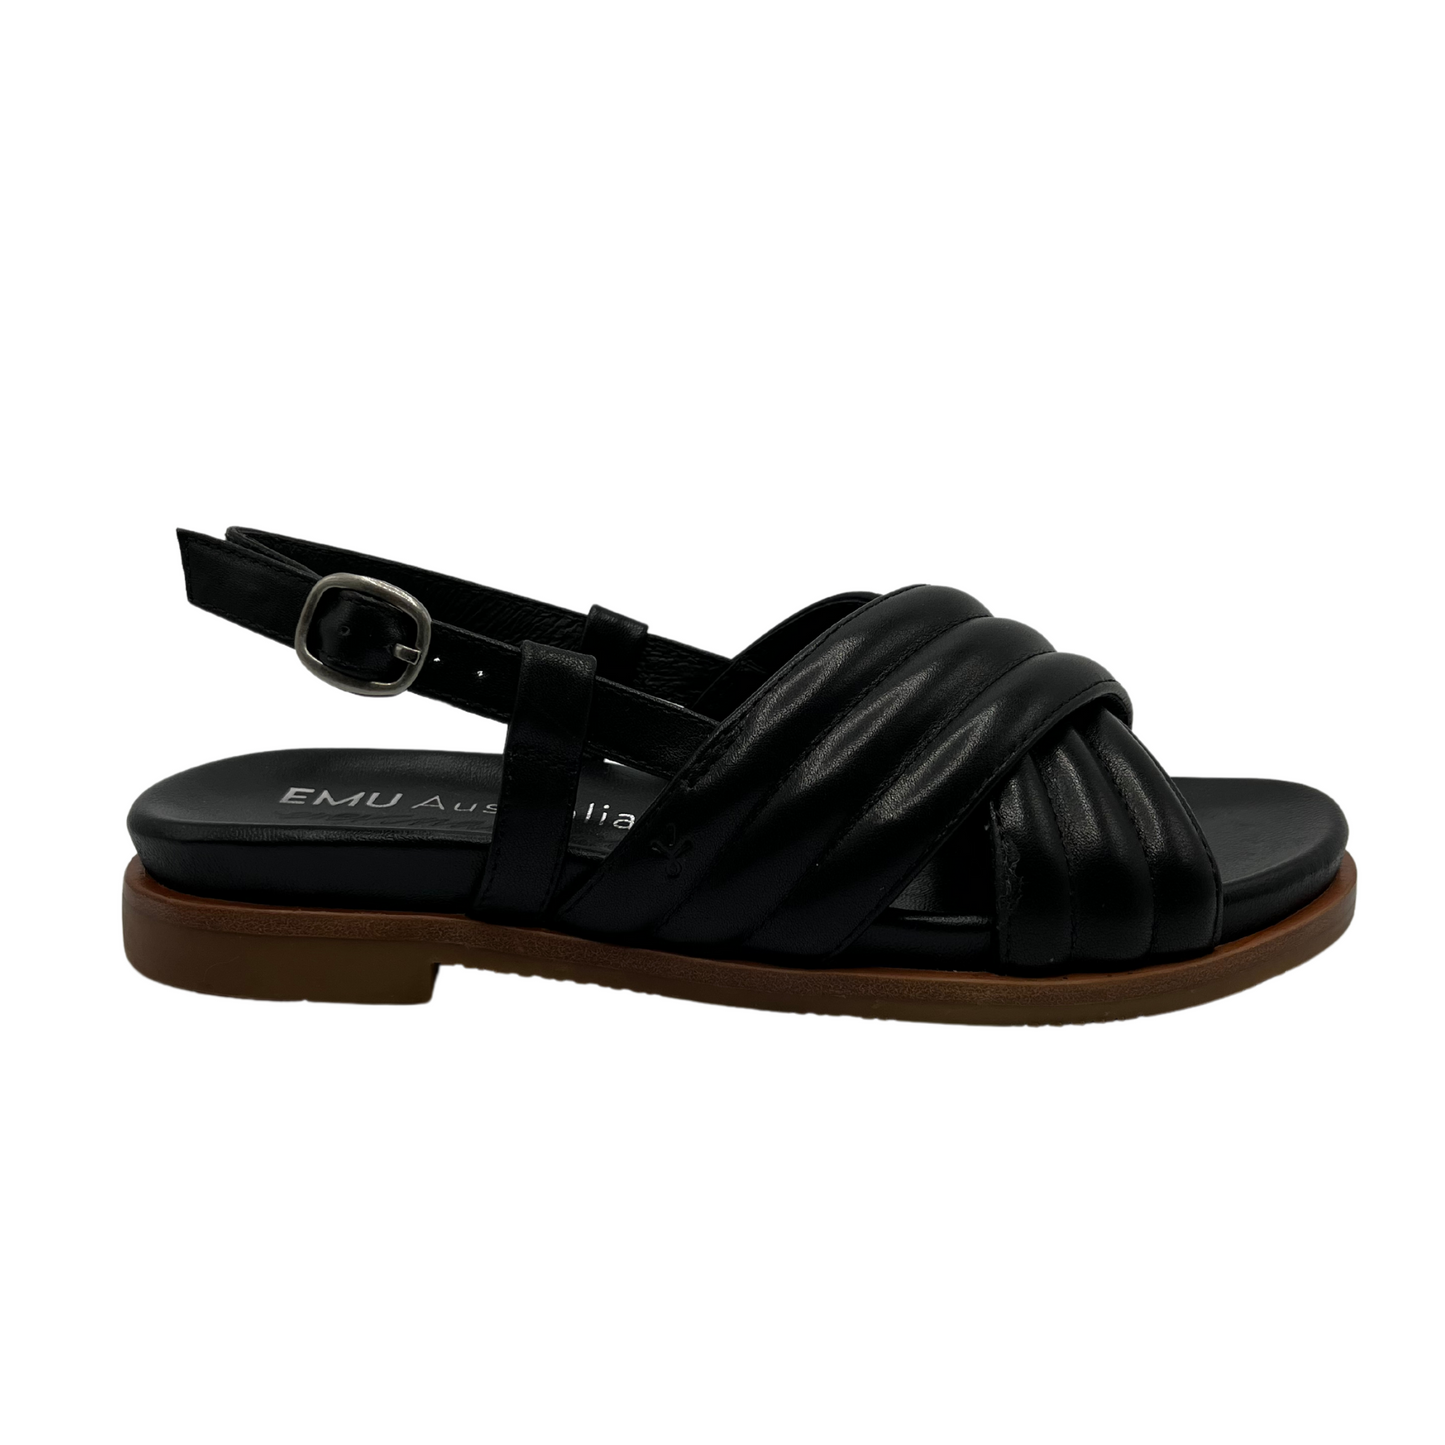 Right facing view of black leather sandal with padded cross over straps and sling back buckle strap